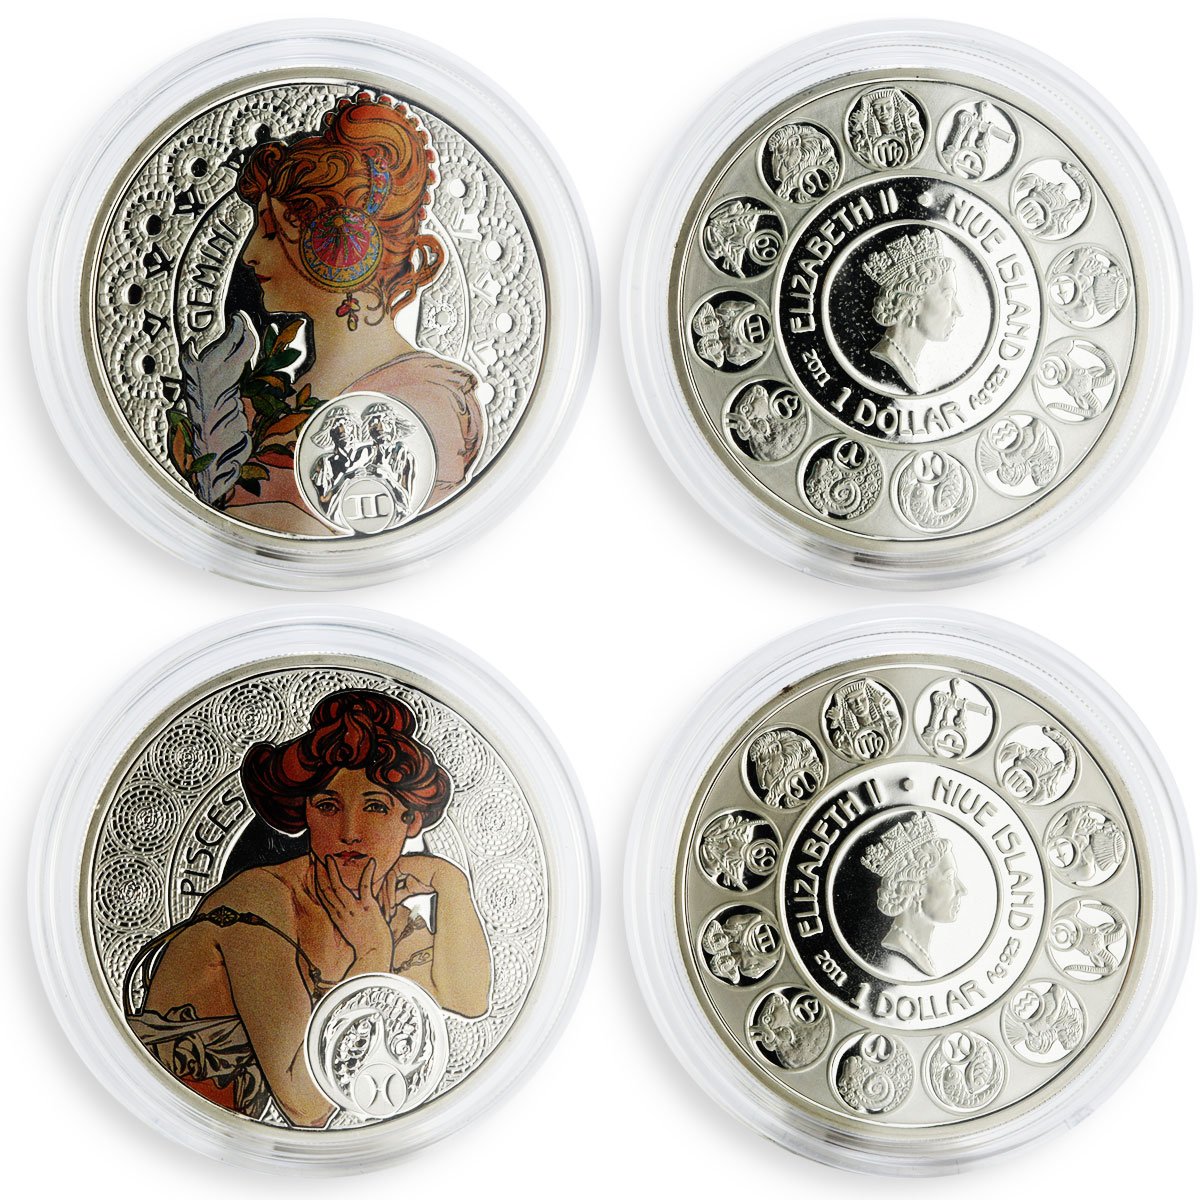 Niue set of 12 coins Zodiac Signs by A. Mucha colored silver coins 2010 - 2011